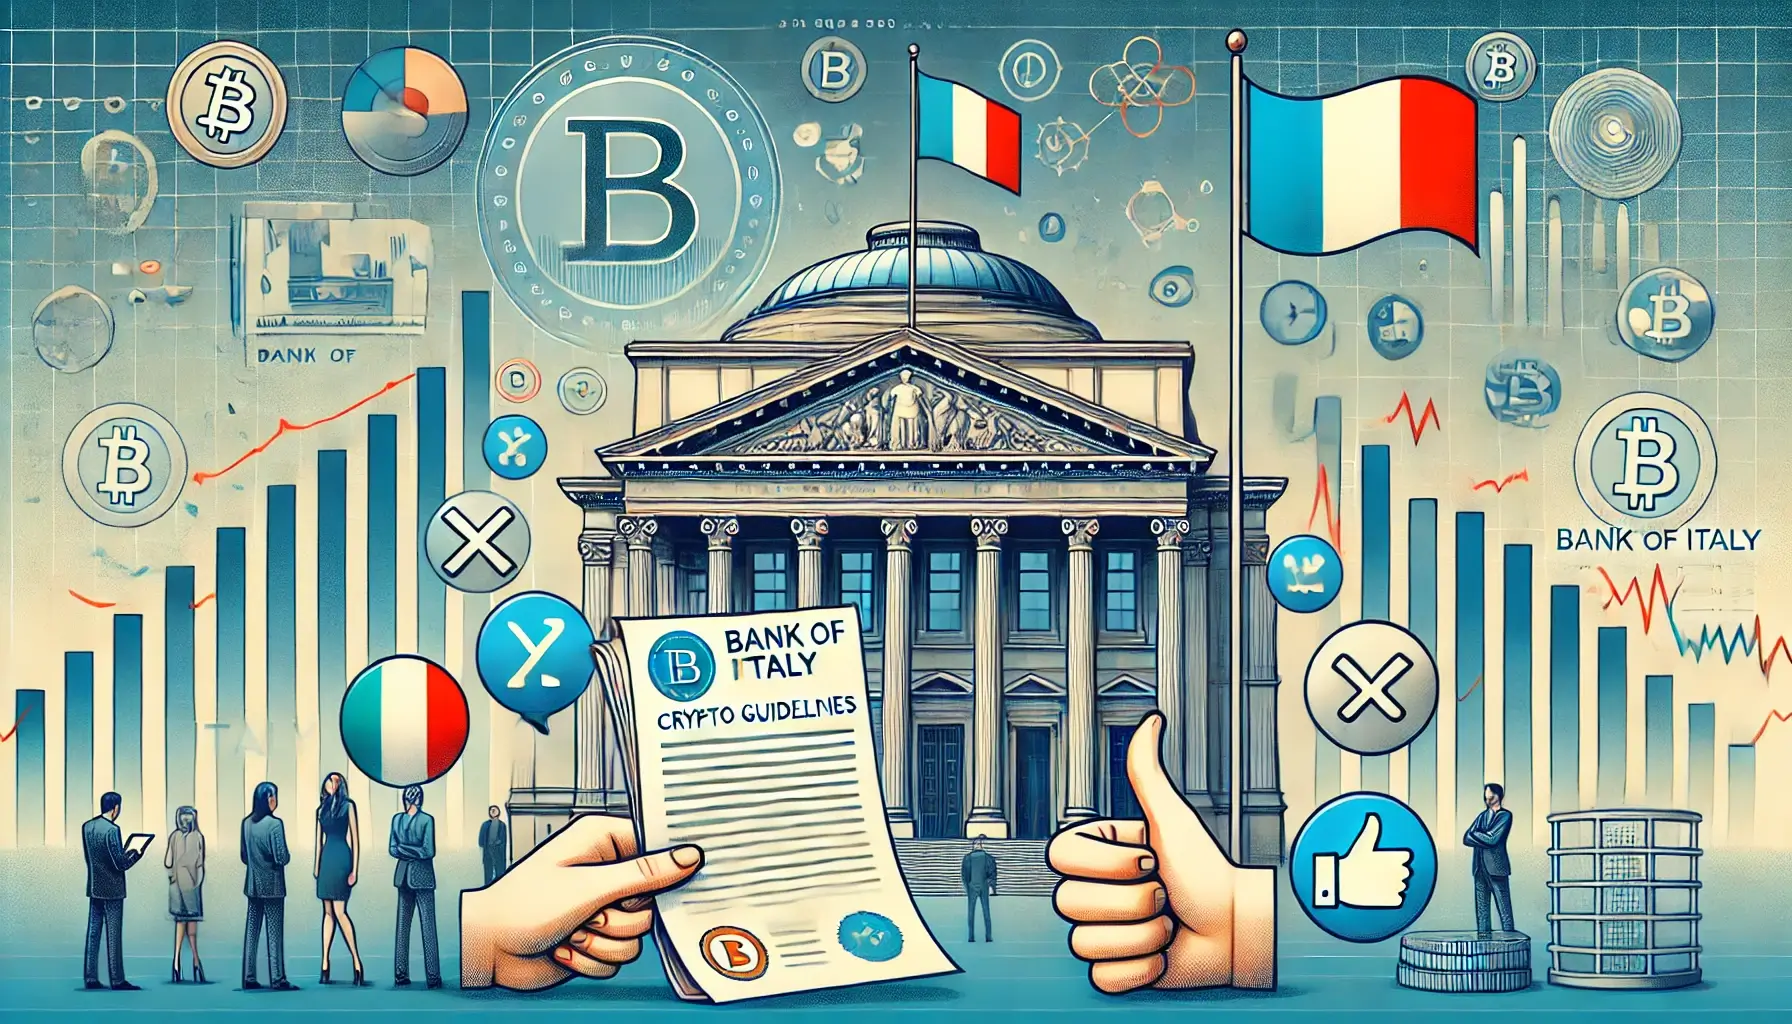 Bank of Italy Releasing Crypto Guidelines Amid Criticism